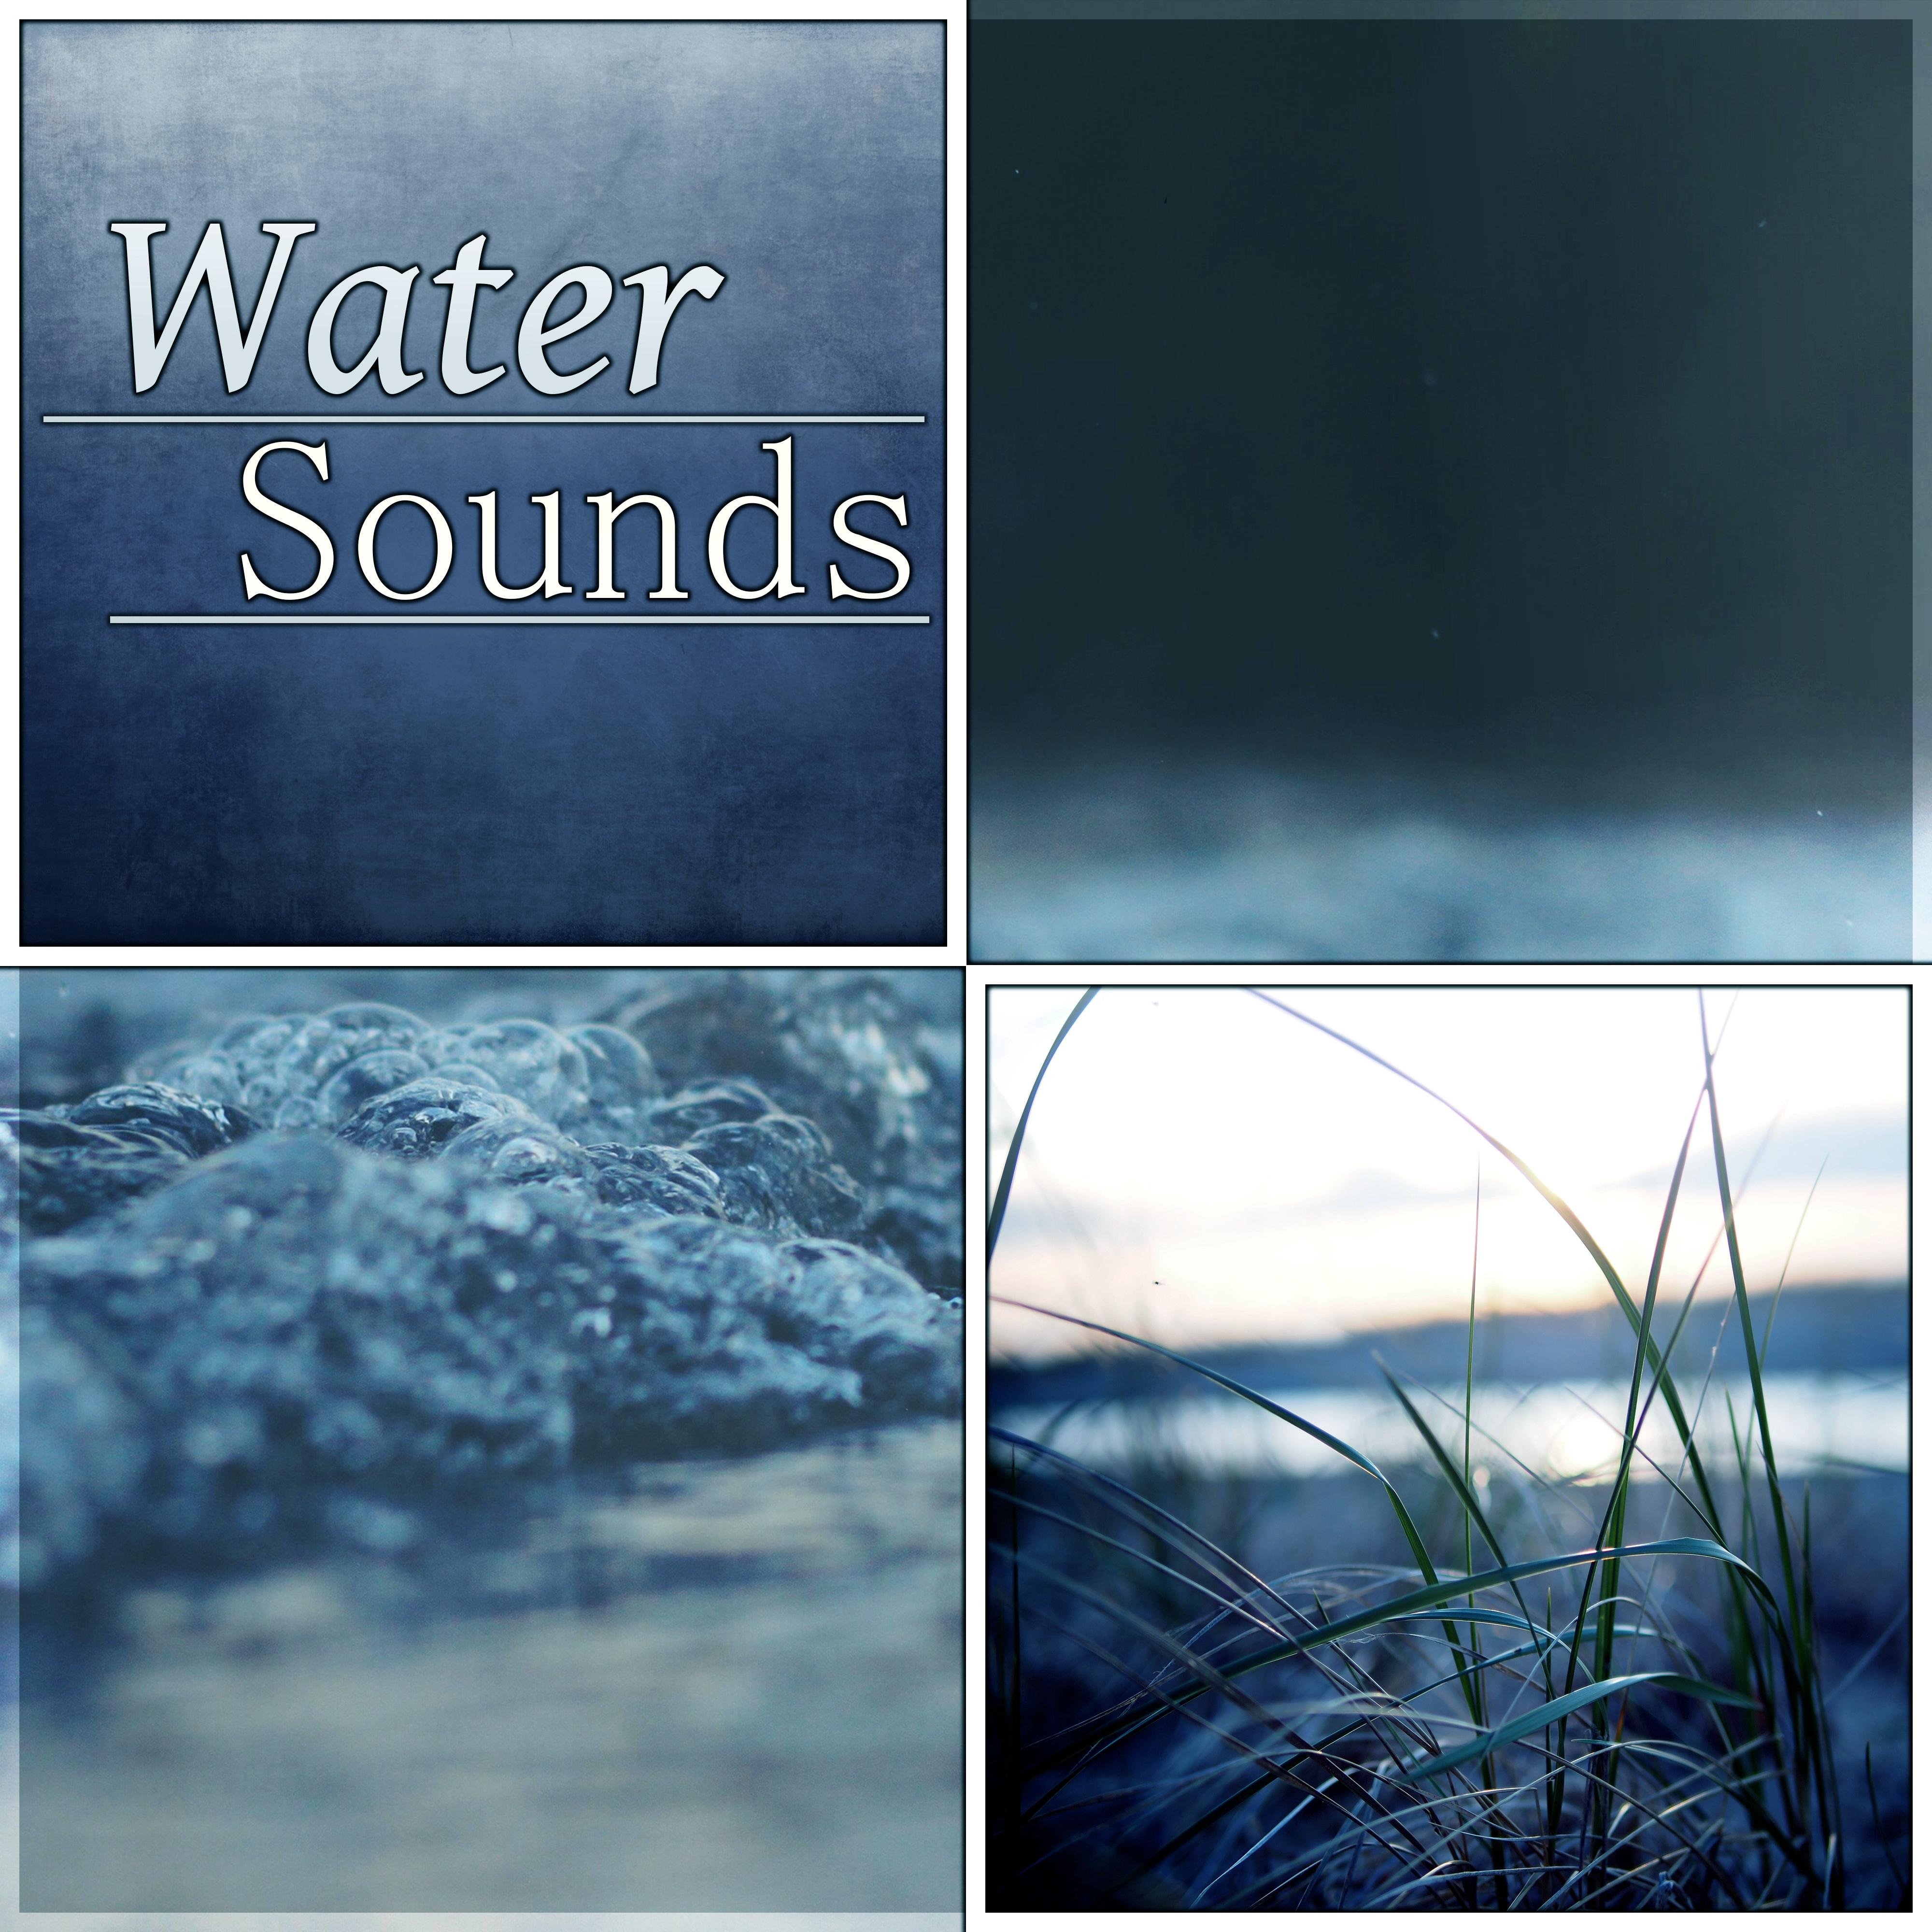 Water Sounds - Calm Music for Reiki, Yoga Positions and Breathing Exercises, Natural Sounds for Pilates and Wellness, Relax Your Body Mind and Soul